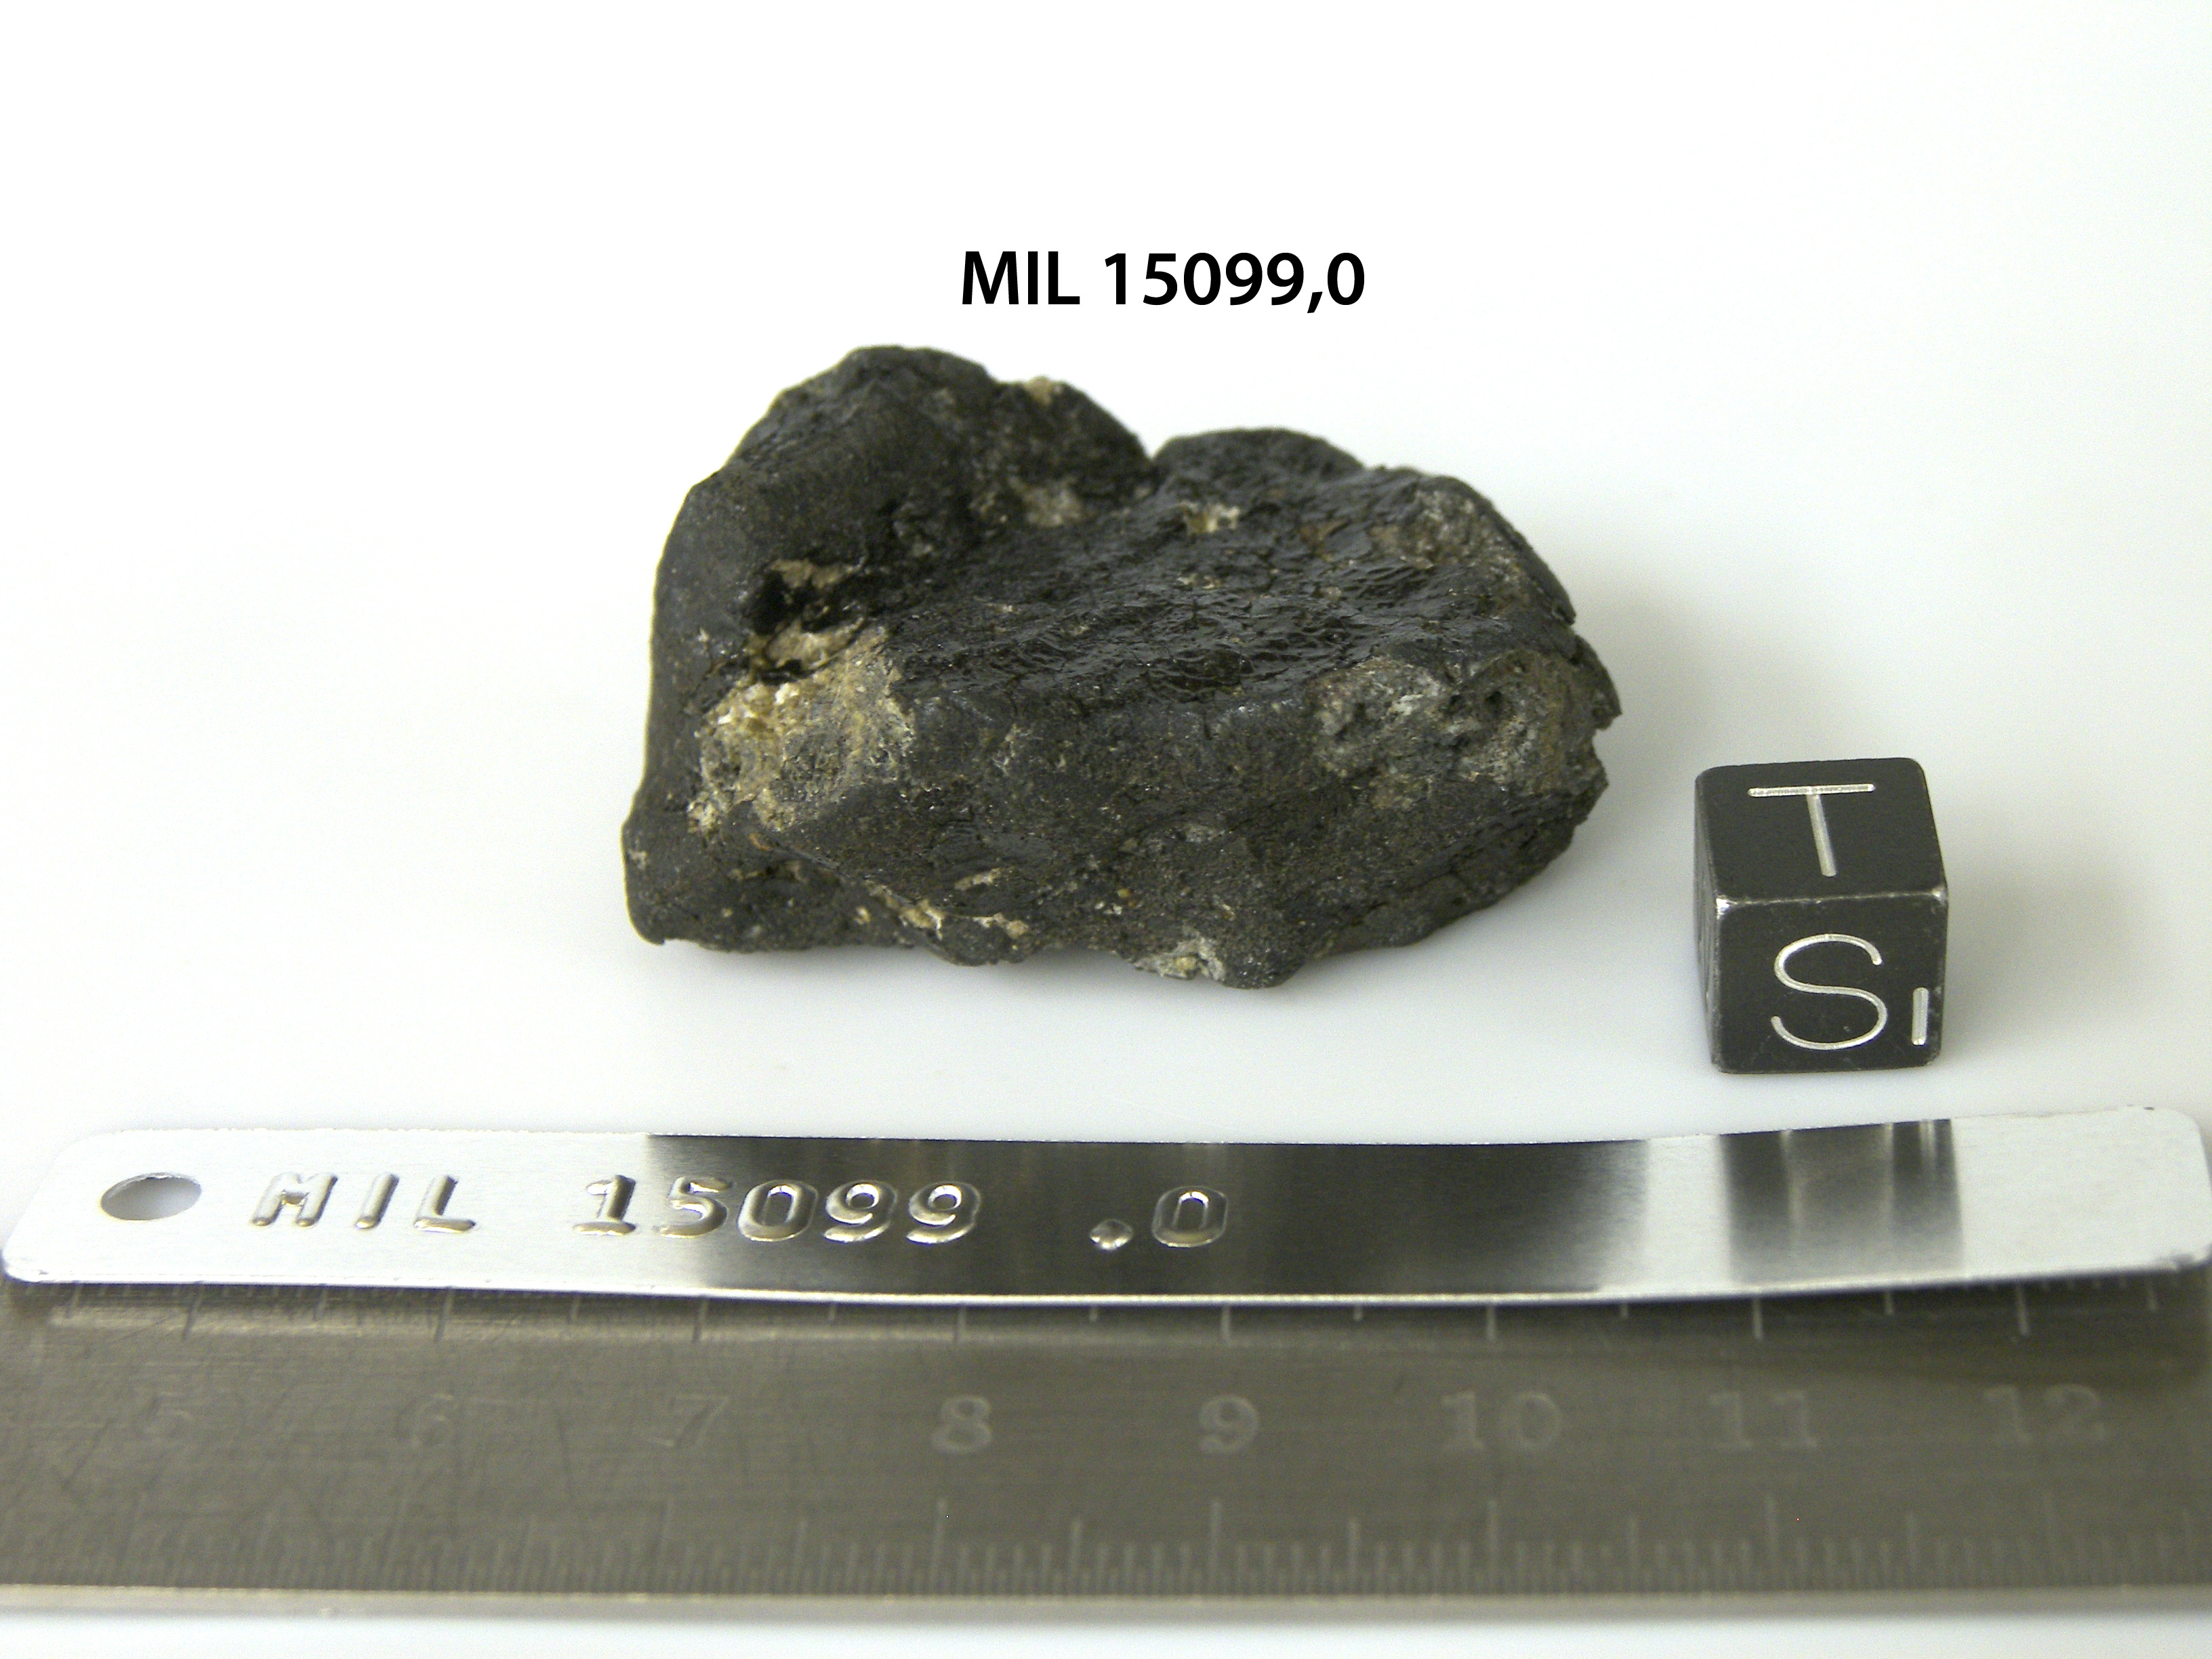 Lab Photo of Sample MIL 15099 Displaying South Orientation